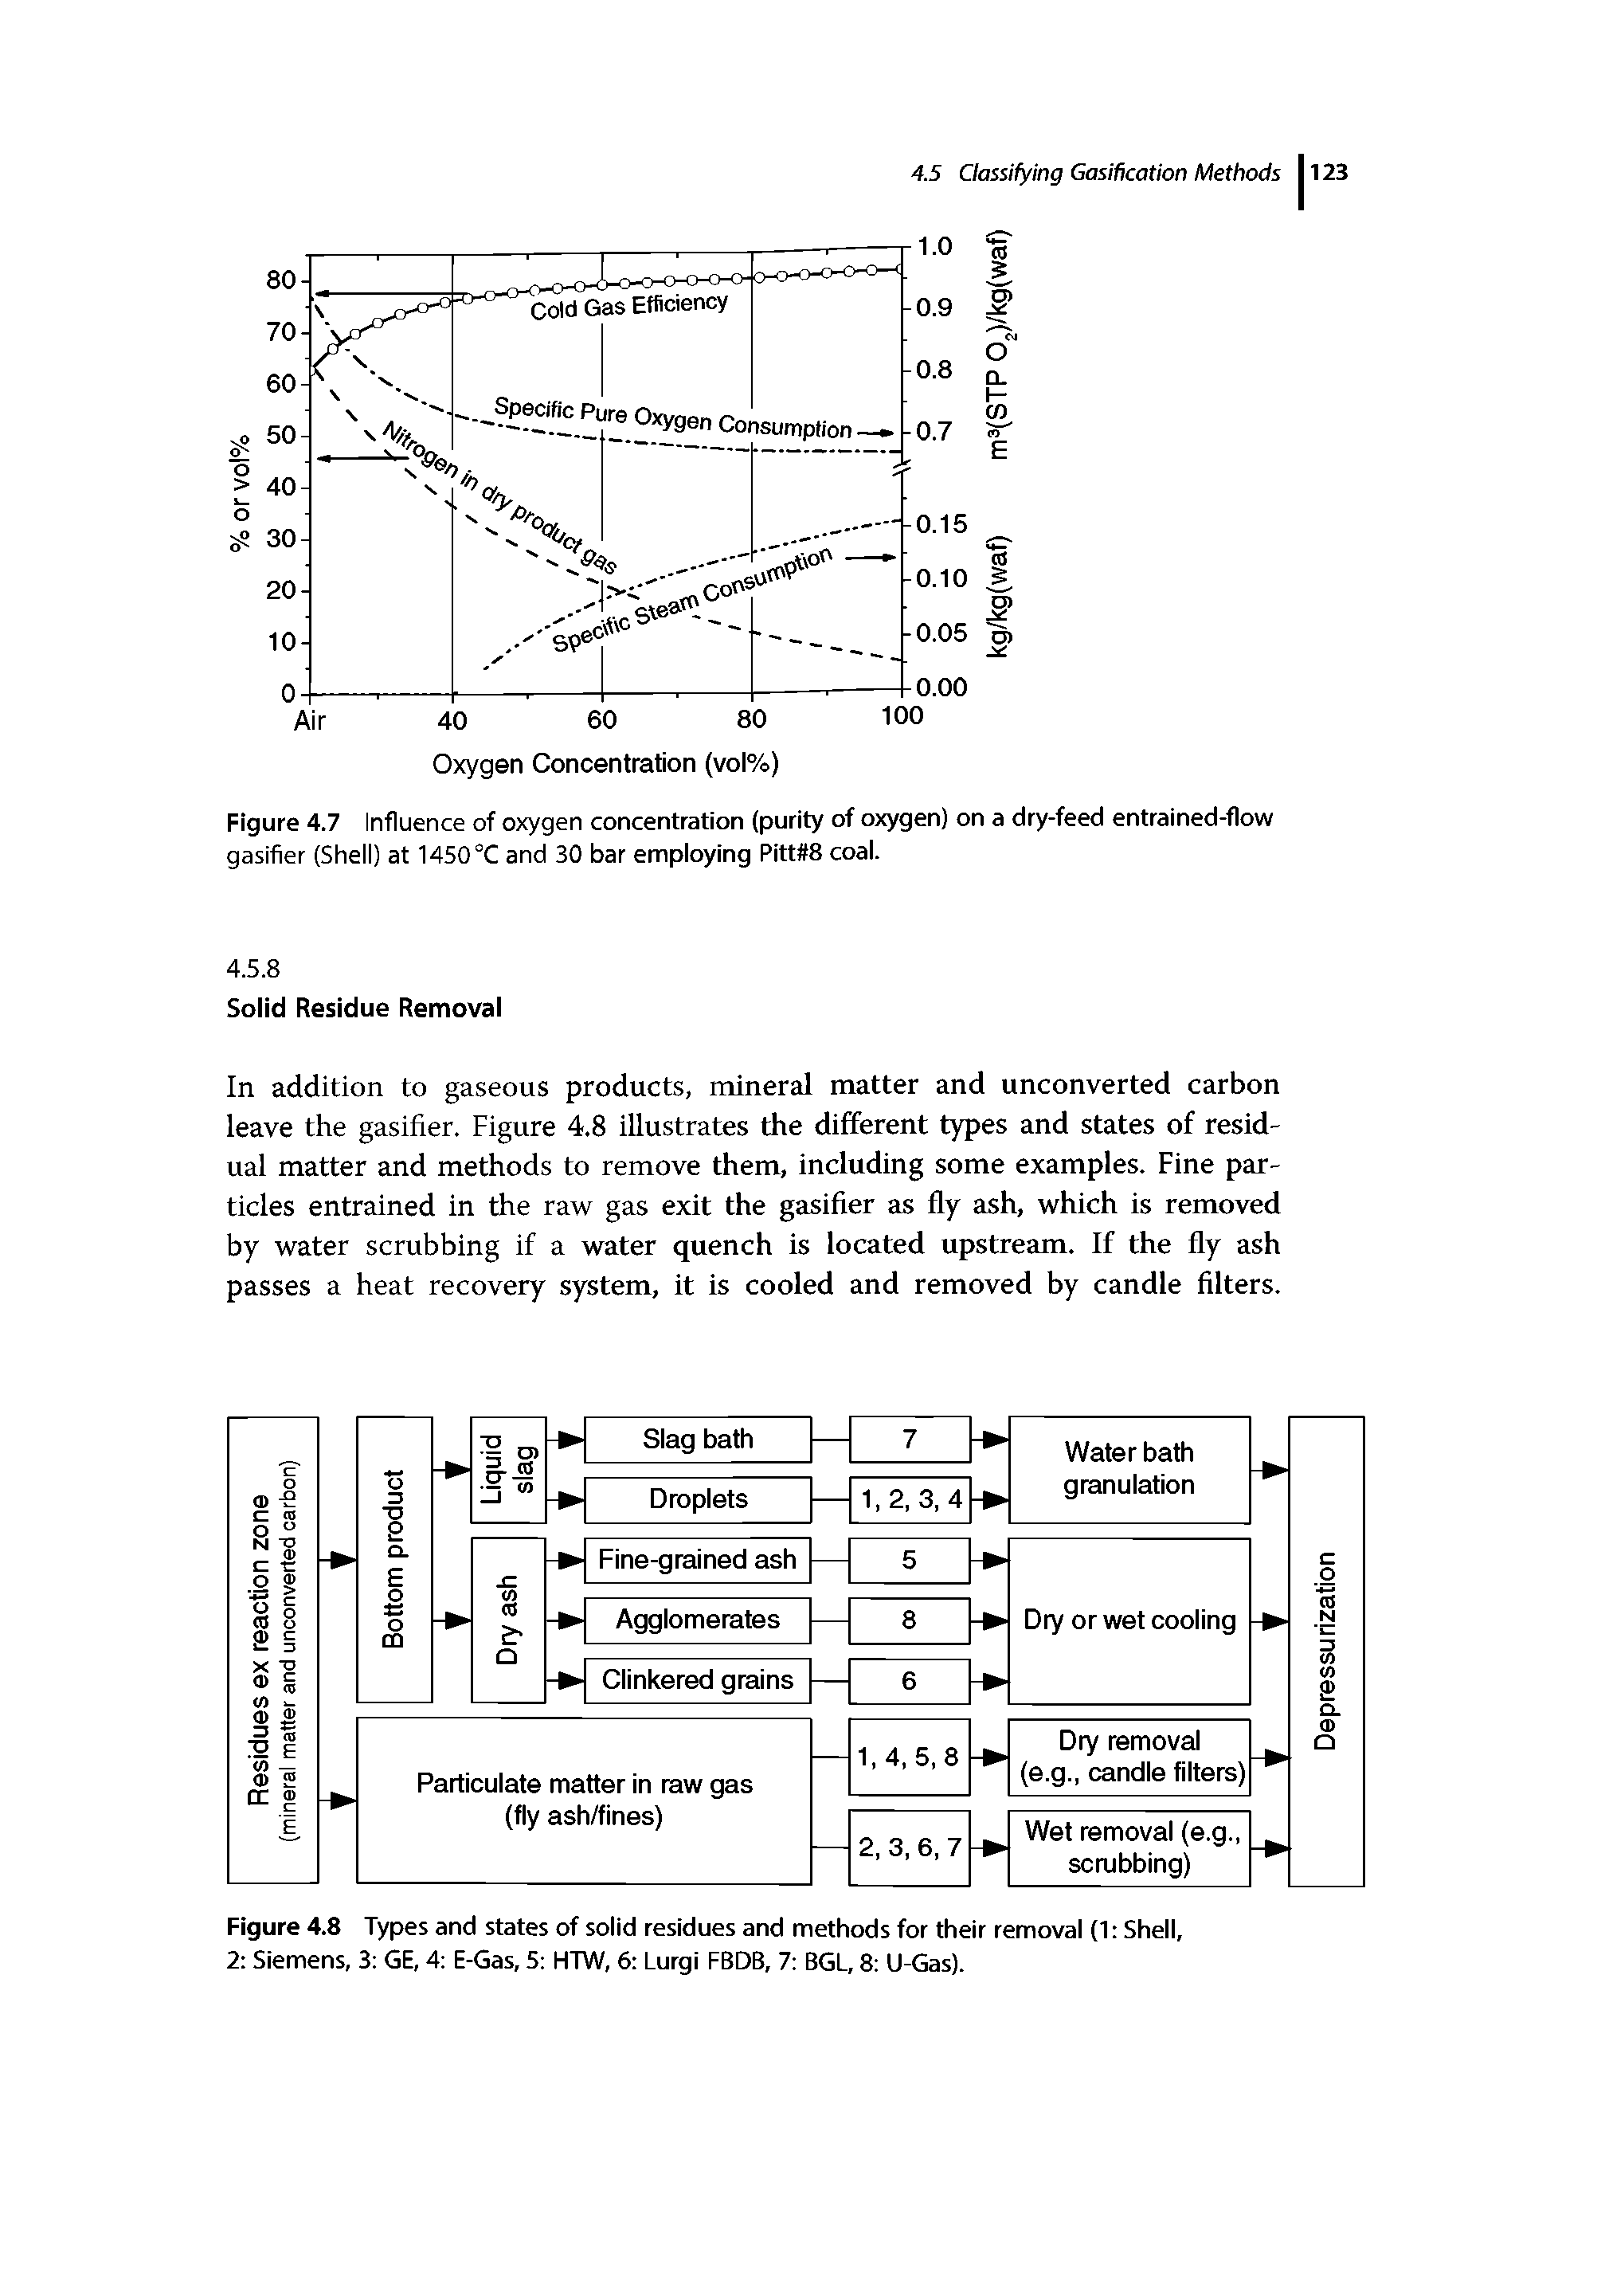 Figure 4.7 Influence of oxygen concentration (purity of oxygen) on a dry-feed entrained-flow gasifier (Shell) at 1450°C and 30 bar employing Pitt 8 coal.